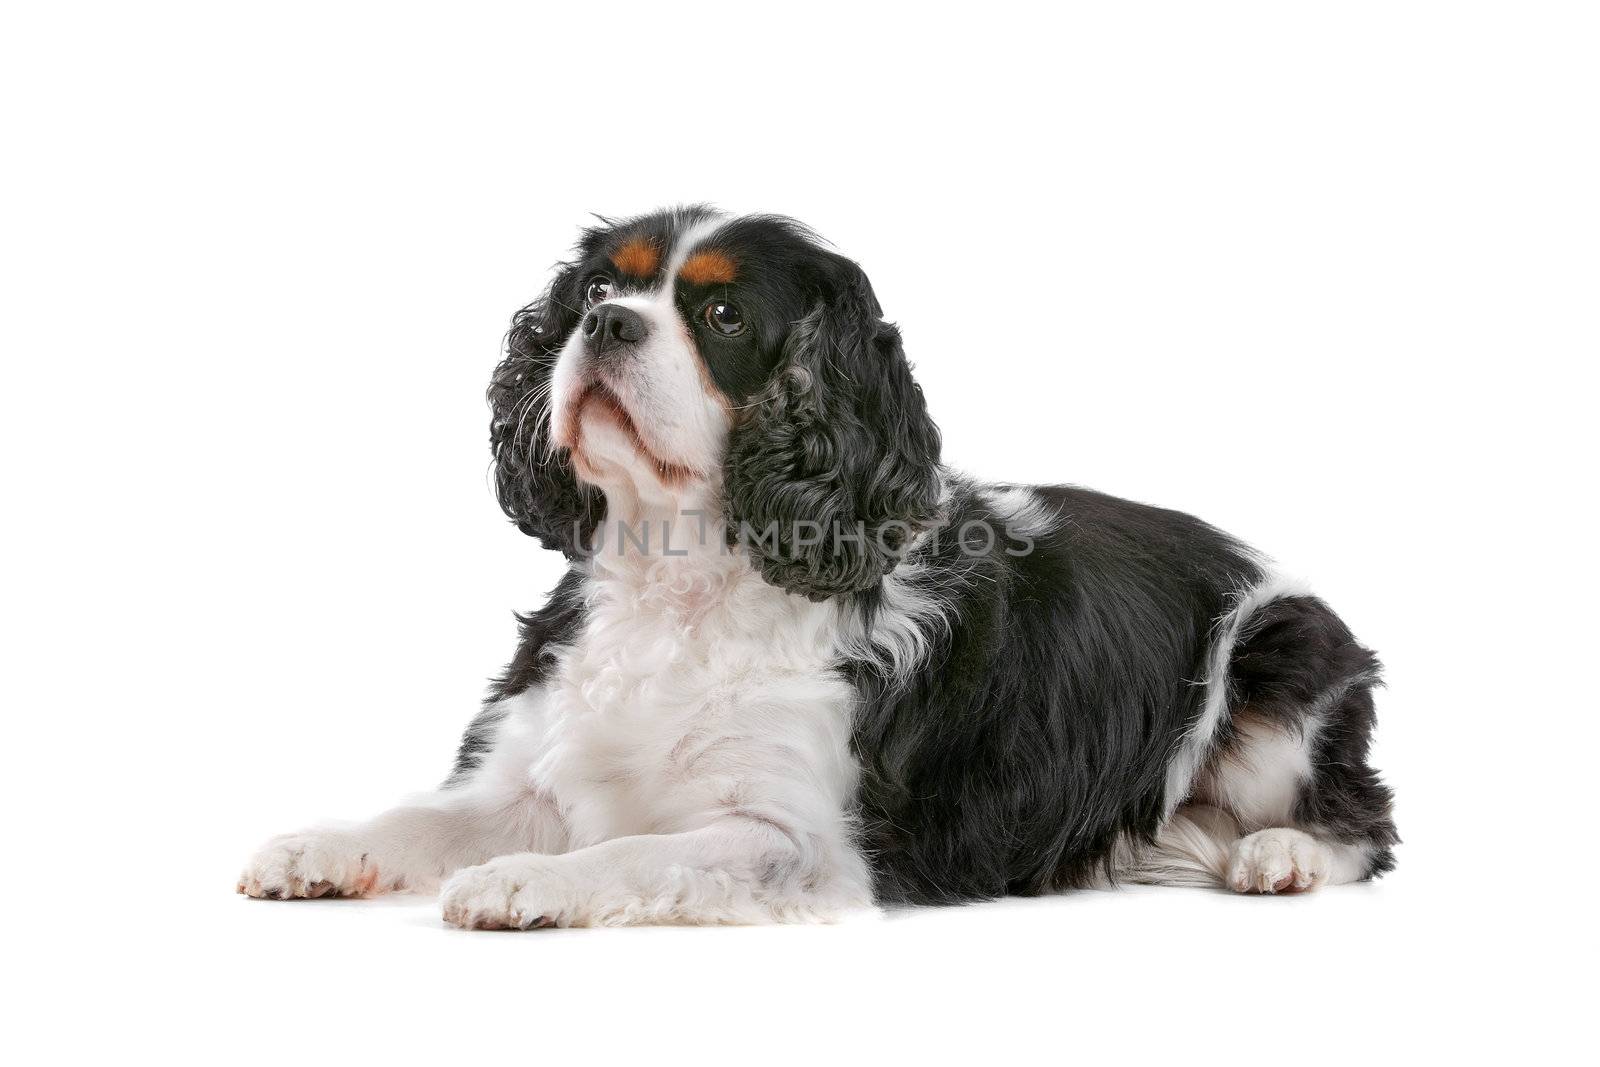 Cute Cavalier King Charles Spaniel dog lying, on a white background